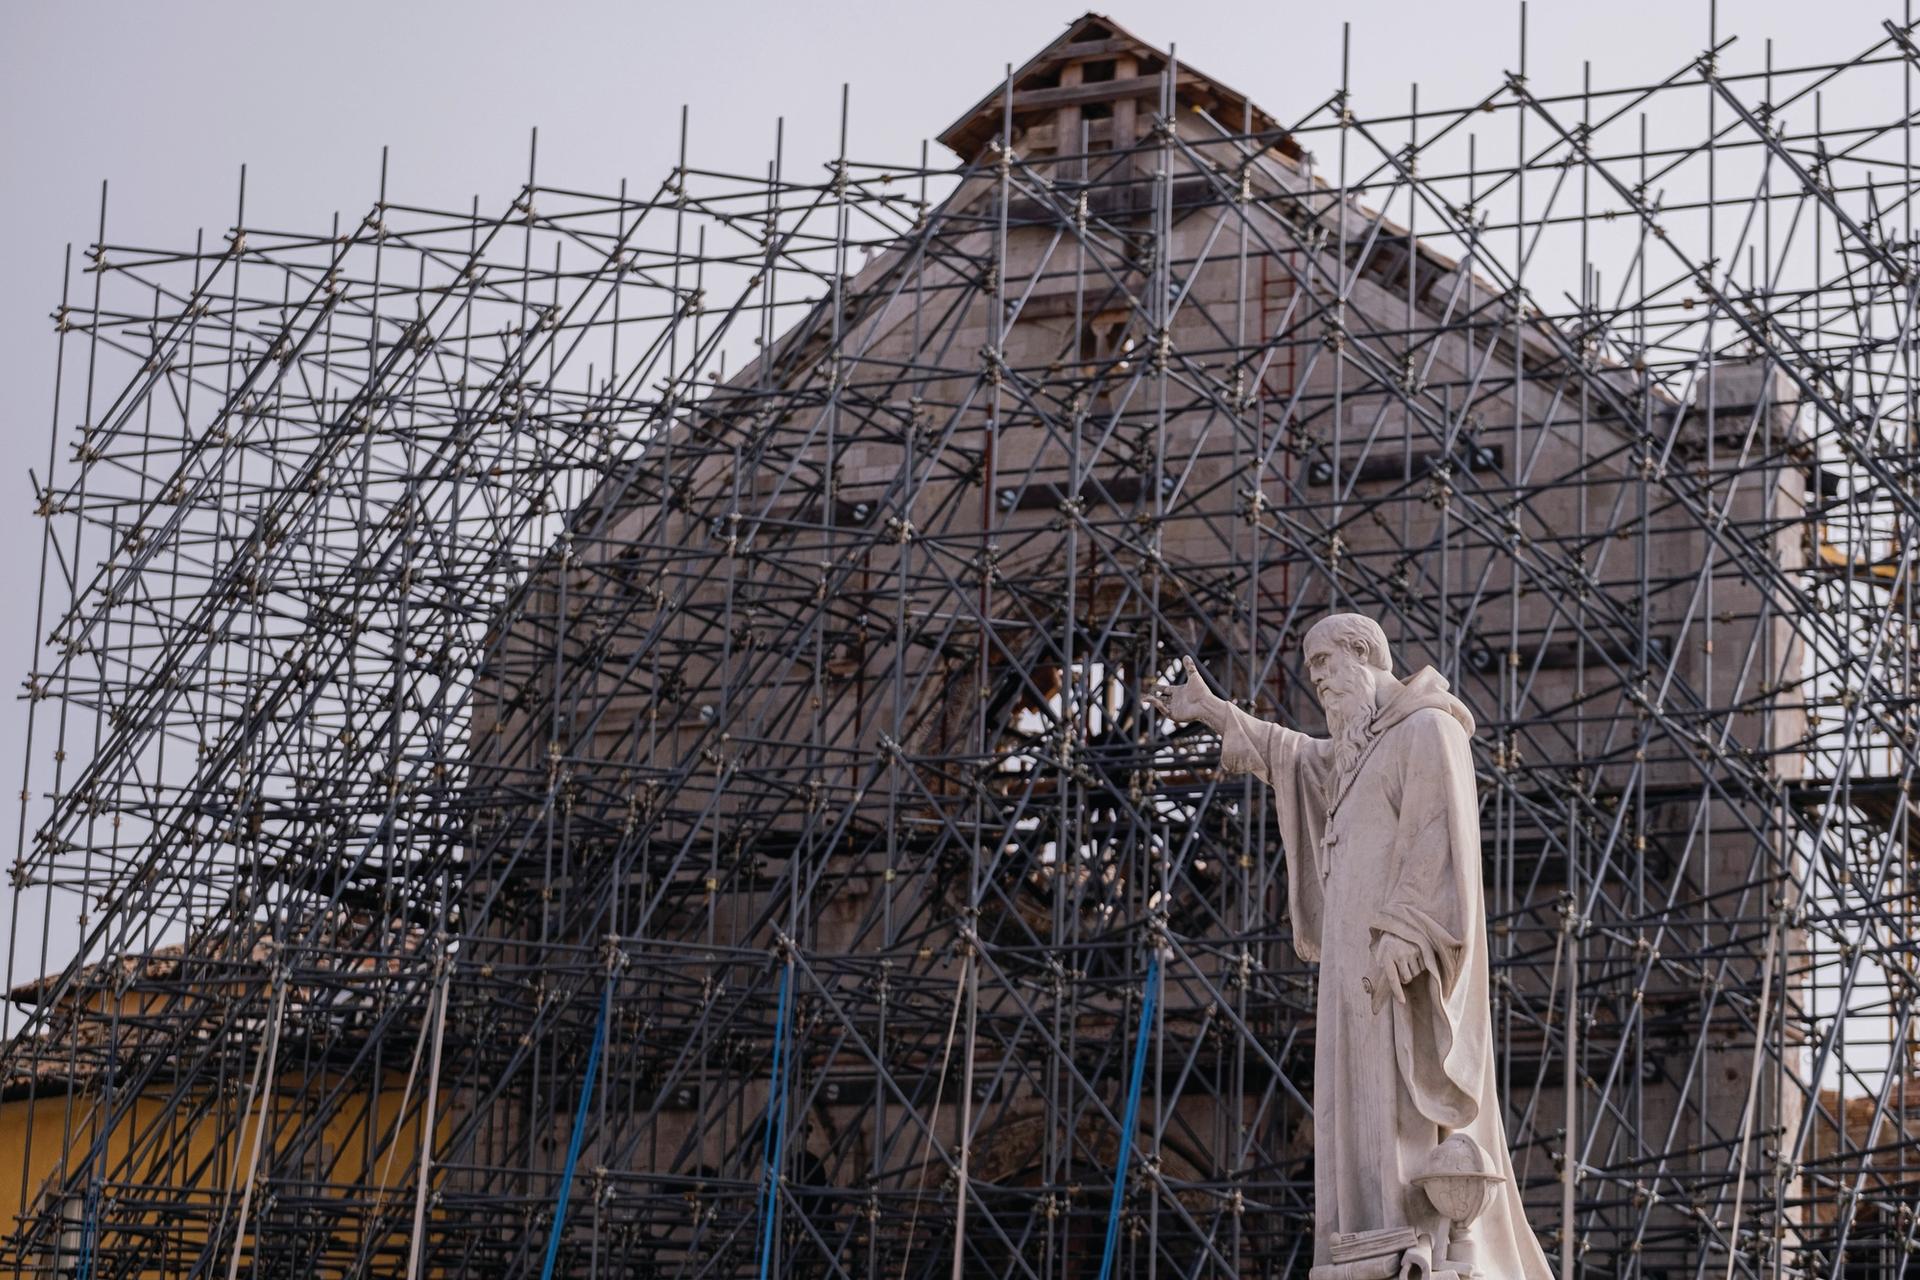 The 12th-century Basilica di San Benedetto in Norcia is under restoration following a 6.5-magnitude earthquake in central Italy in 2016 Photo: Antonio Balasco/Kontrolab/LightRocket via Getty Images